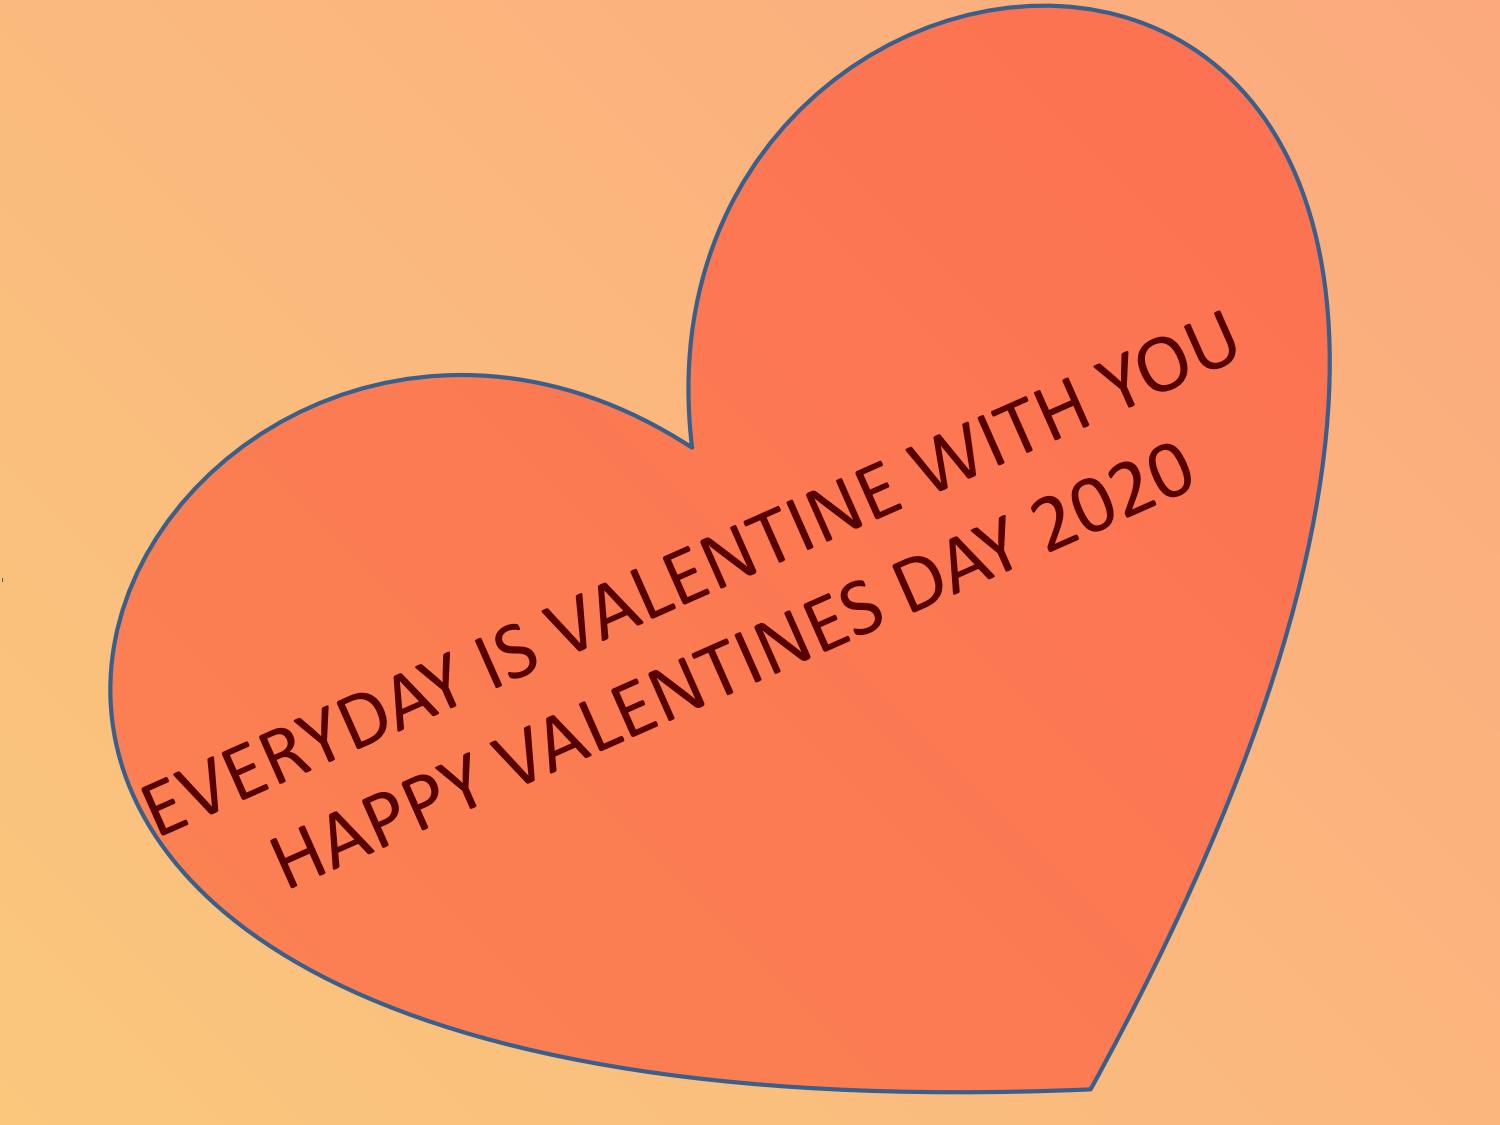 every day is valentine with you happy valentine’s day 2020